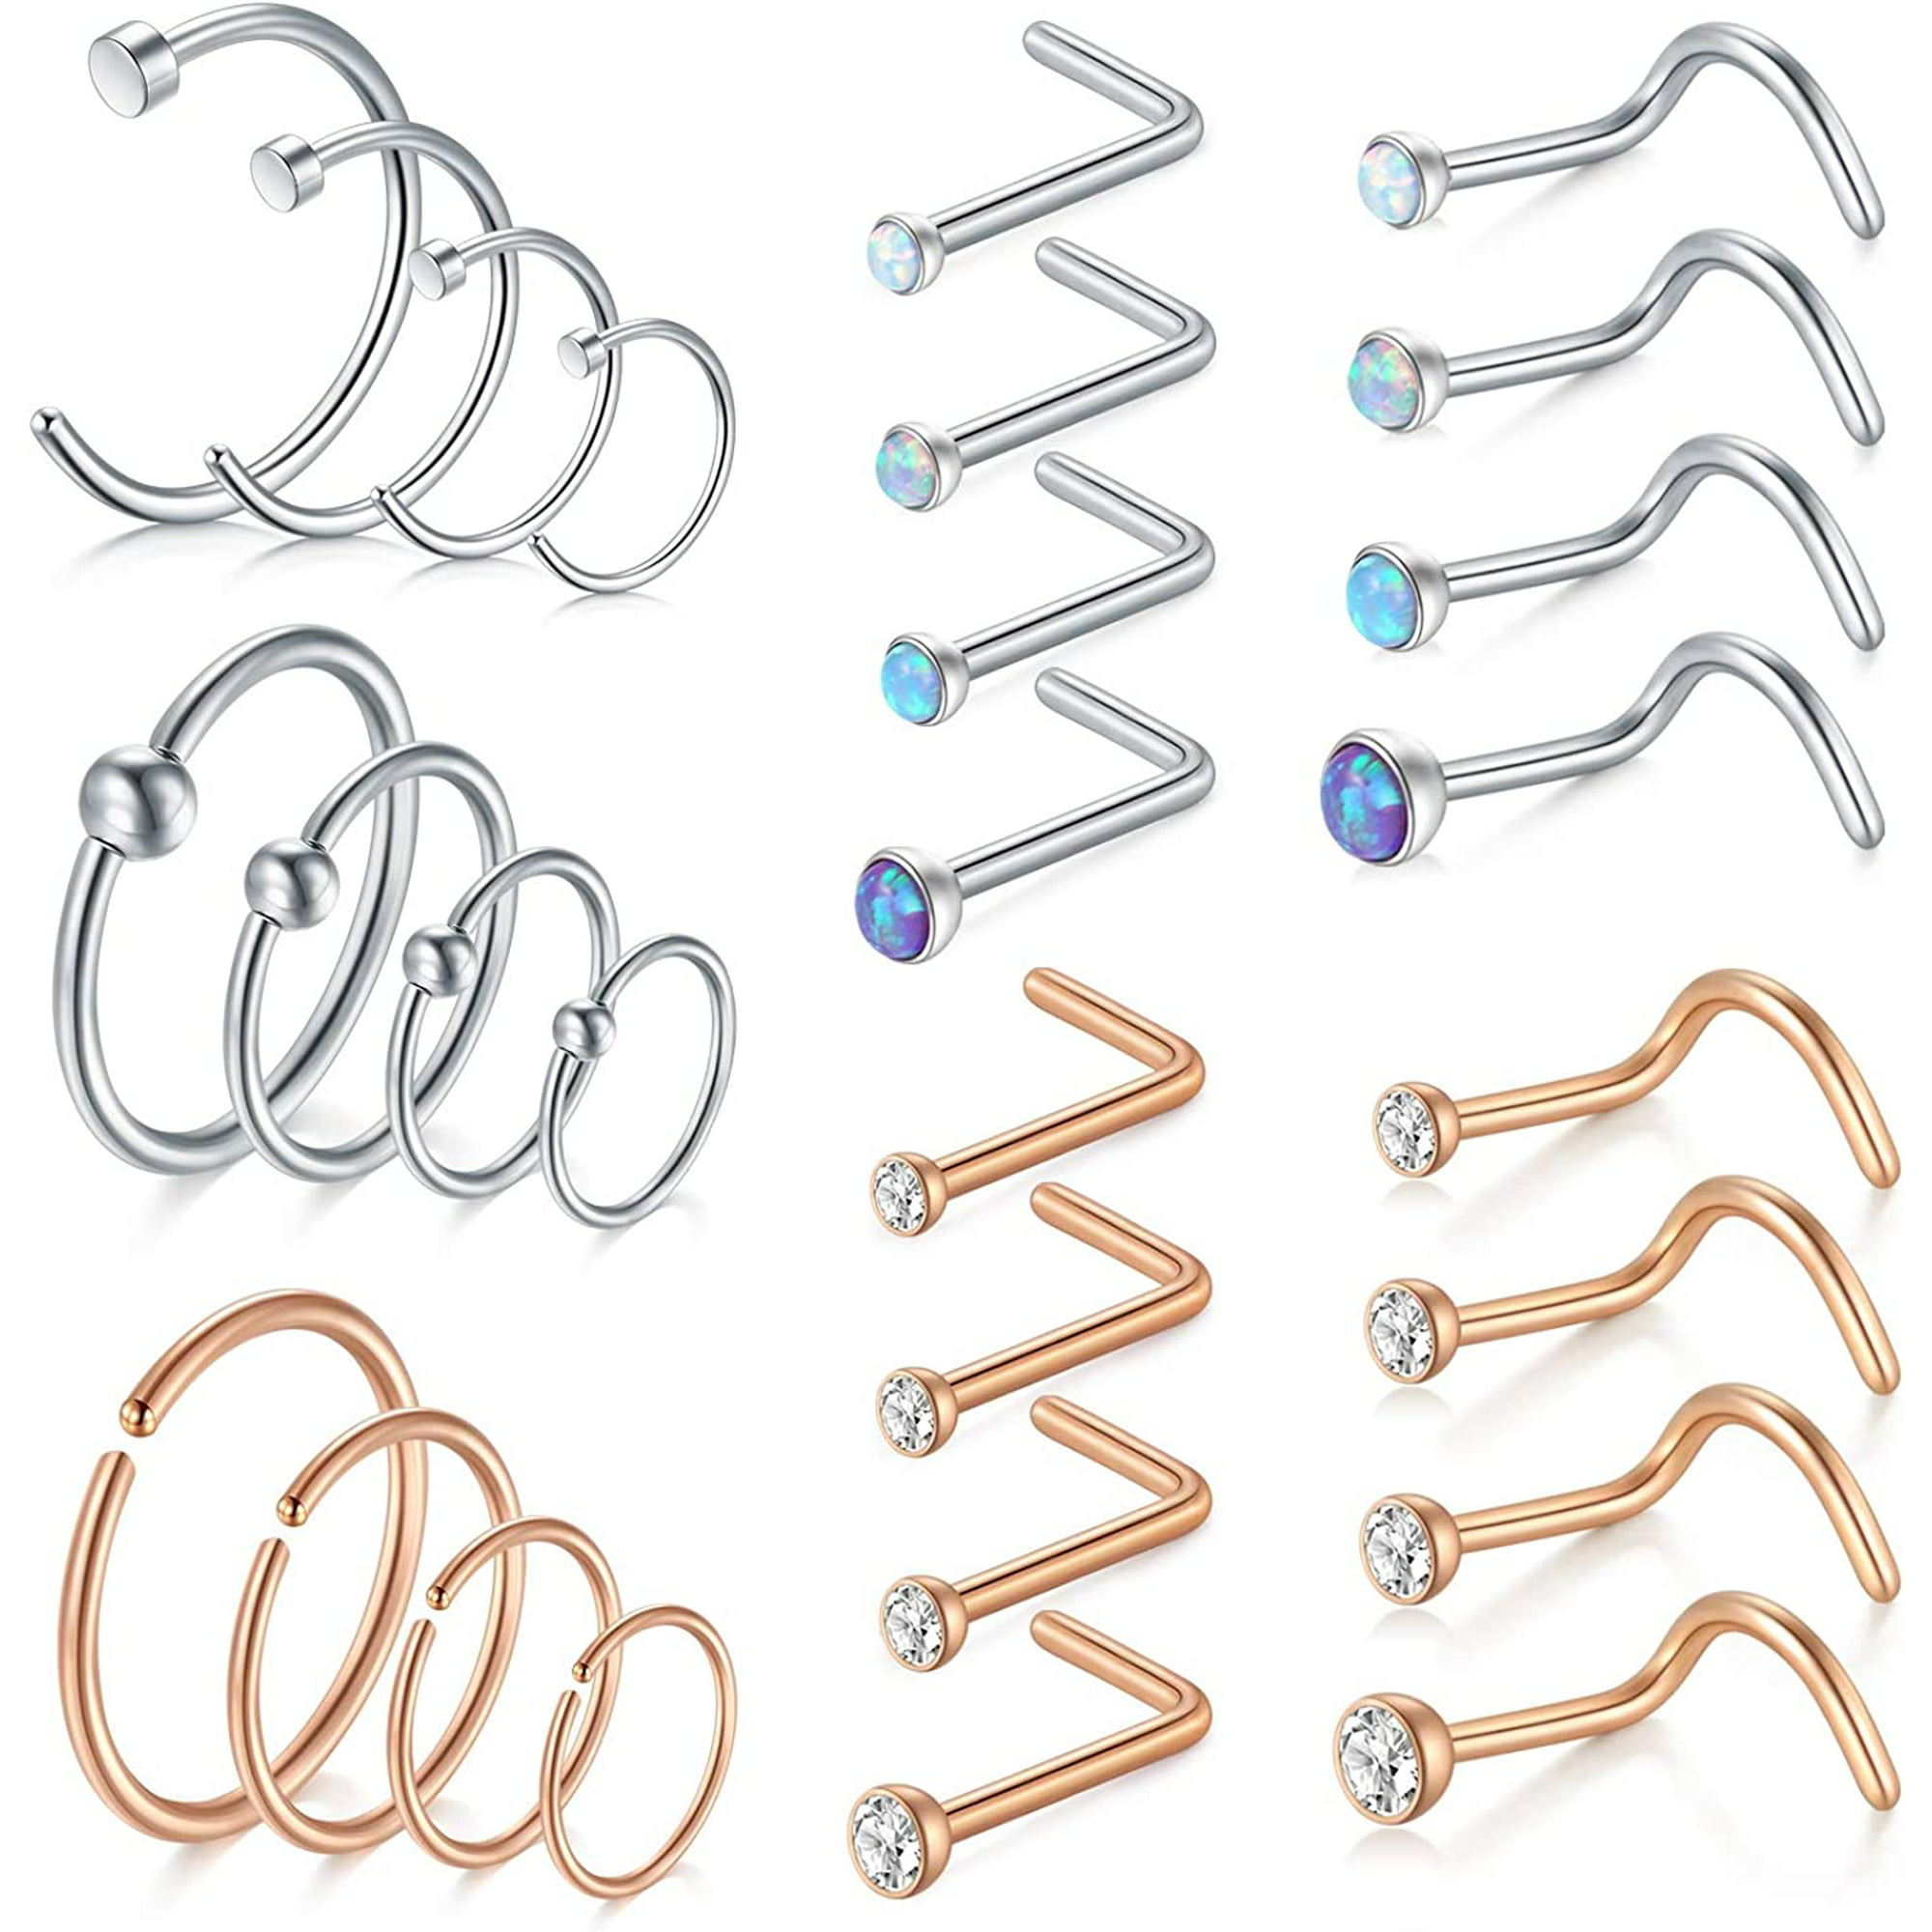 Longita Nose Rings Hoops 18g 20g Septum Ring L Shaped Nose Studs Screw Bone Surgical Stainless Steel C Shape Moon Double Hoop High Nostril Piercing Jewelry Pack Silver Rose Gold Black